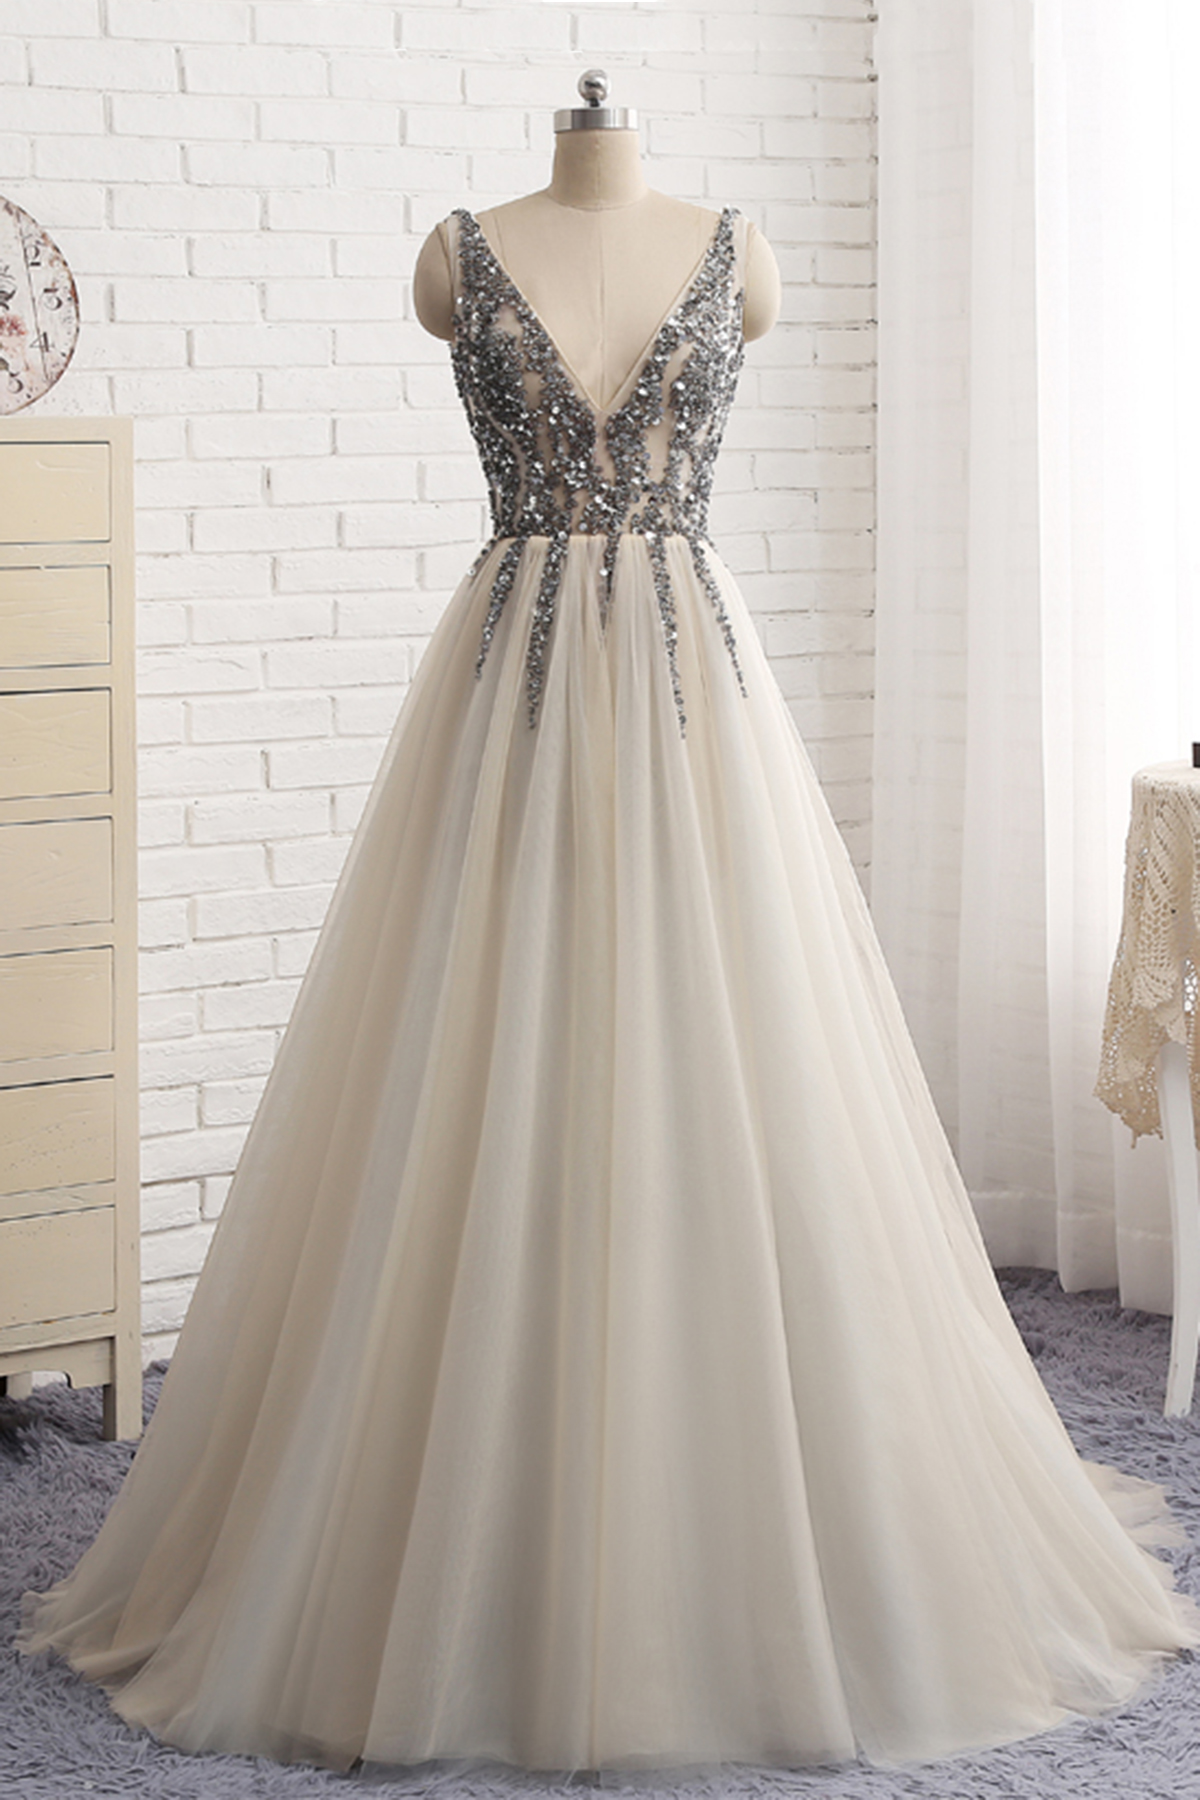 Prom Dress,evening Gowns,simple Prom Dress,elegant Evening Dress,simple Prom Dresses,elegant Prom Gown ,pd141019